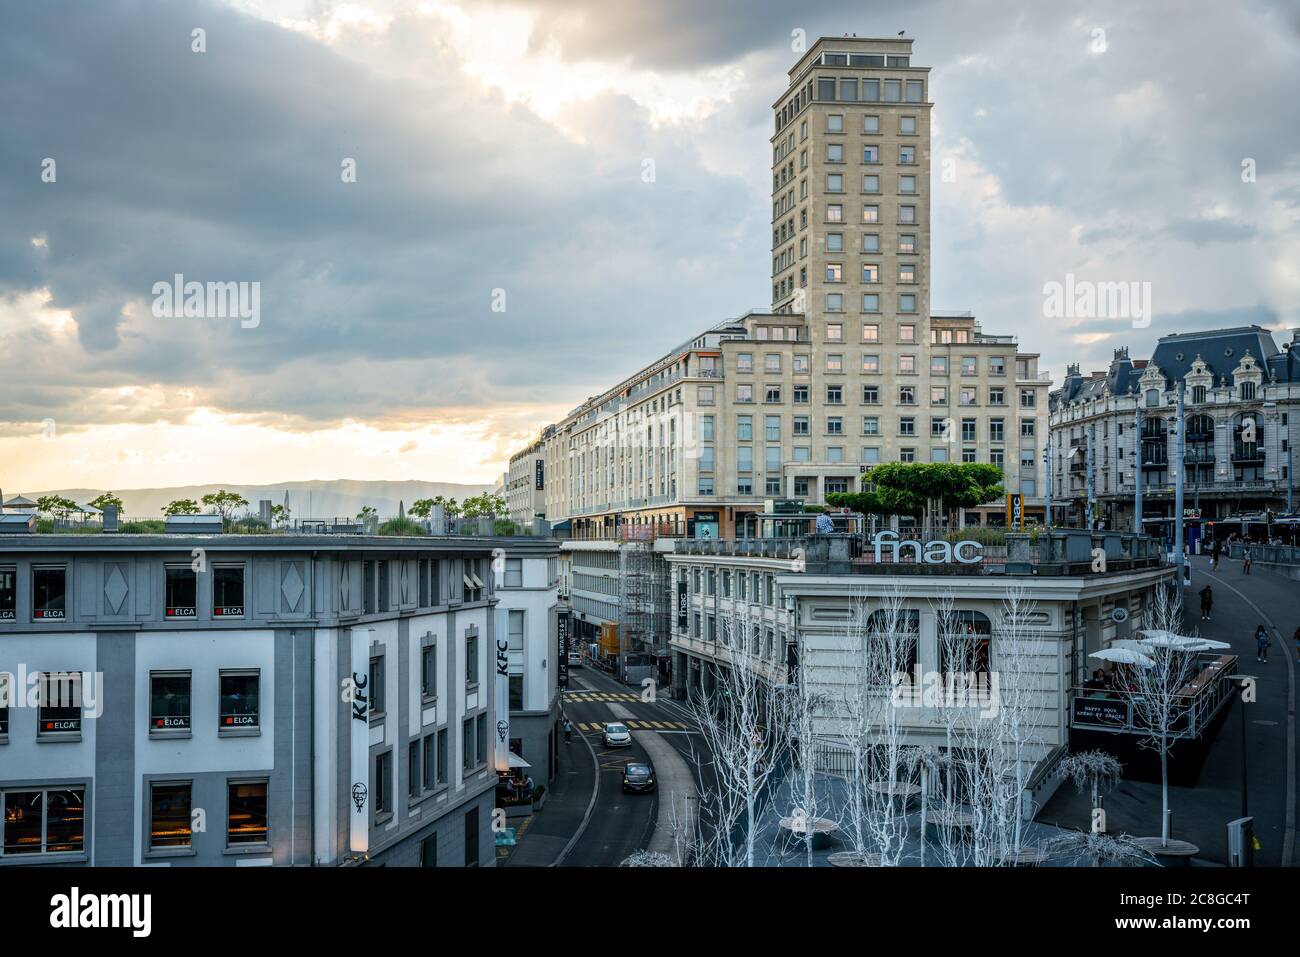 Lausanne Switzerland , 25 June 2020 : View on the Tour de Bel-Air or Bel Air tower at sunset a 1931 heritage building in Le Flon district Lausanne Swi Stock Photo